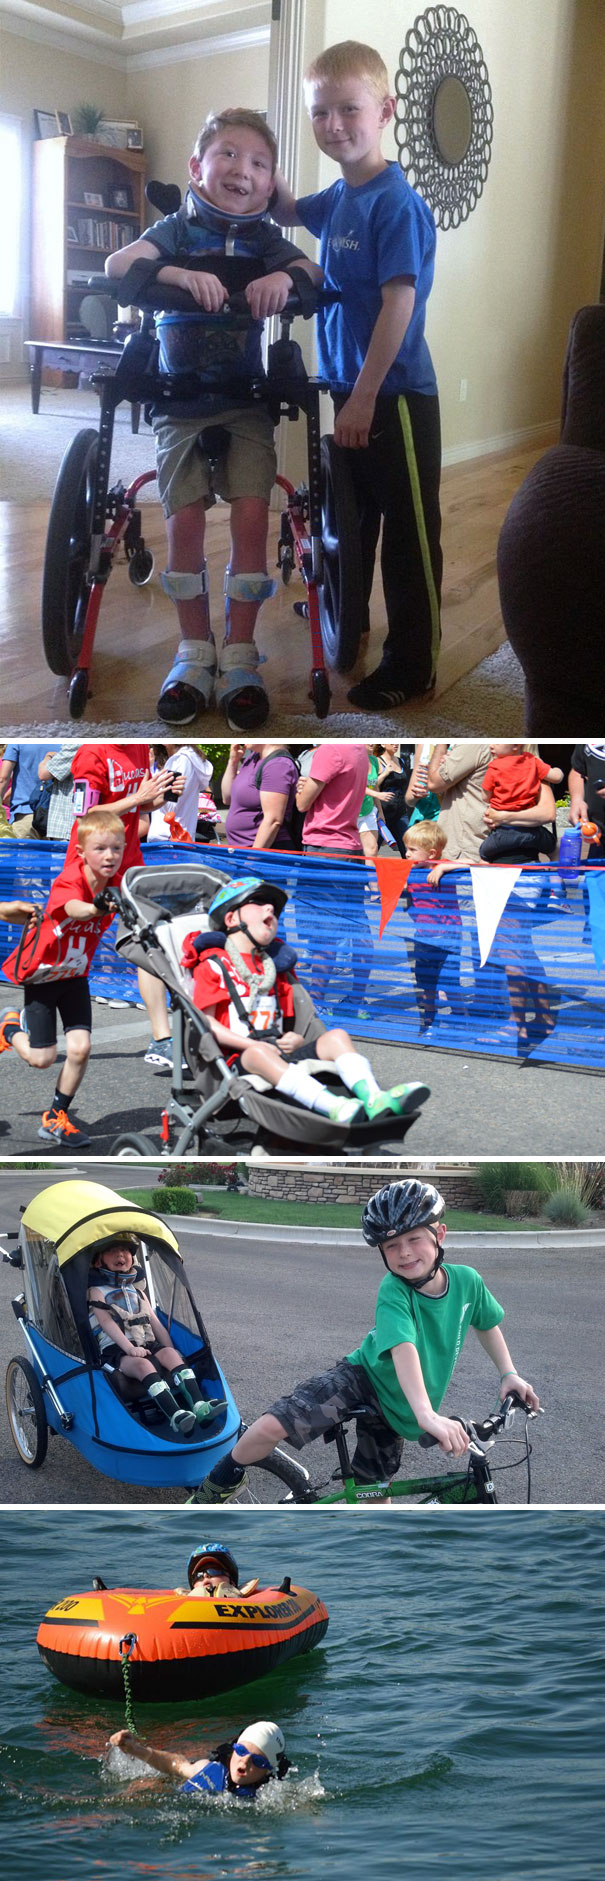 8-Year-Old Noah Completes Mini-Triathlon With His Disabled Brother Lucas